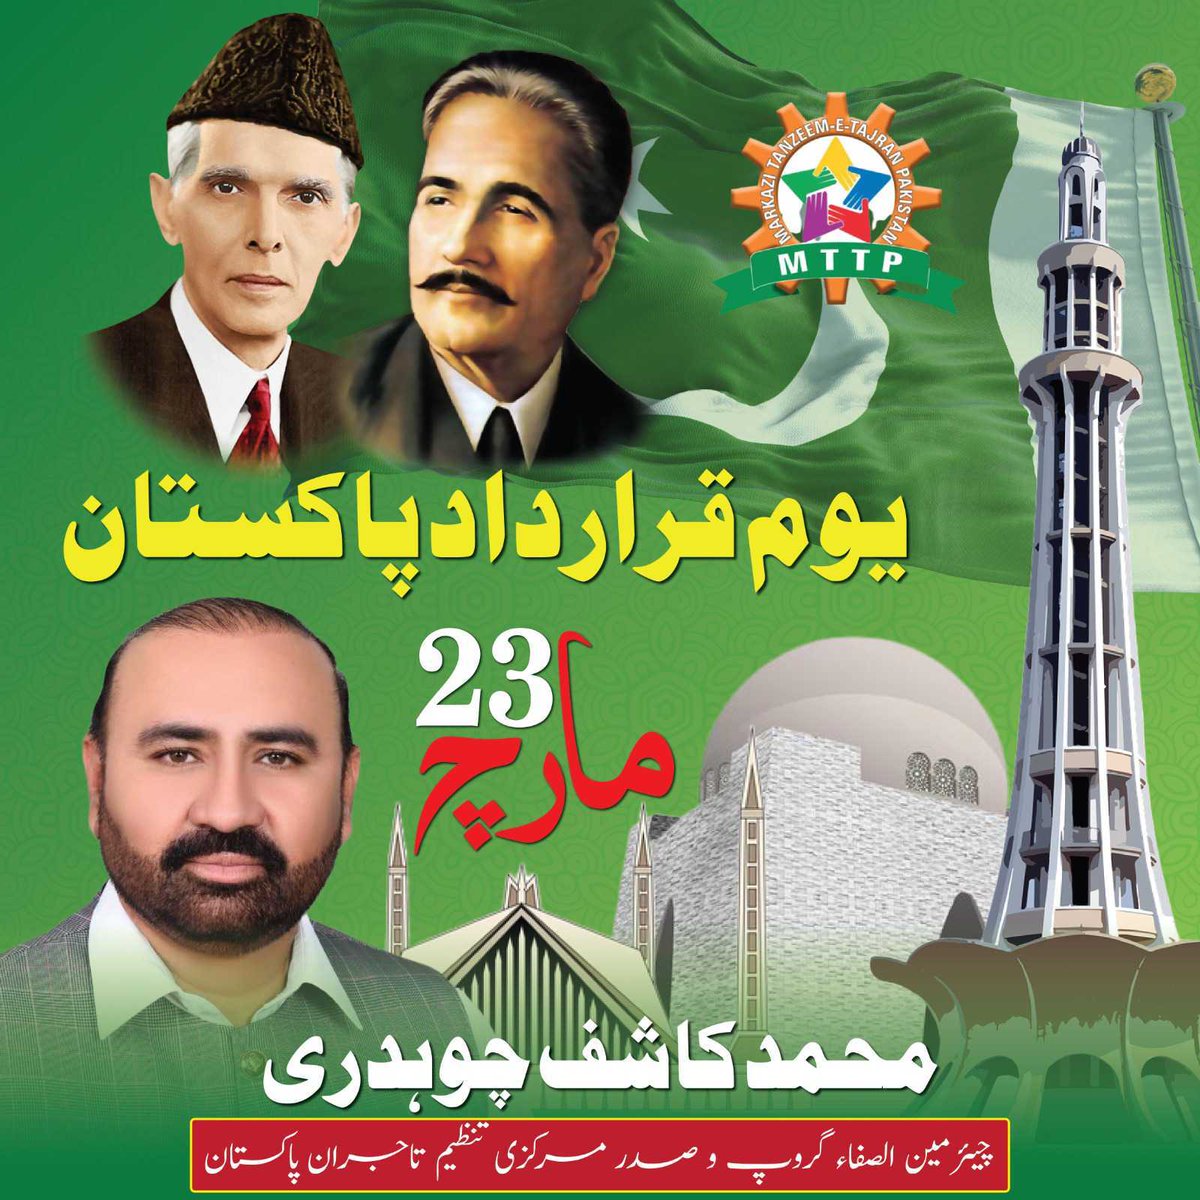 Happy Pakistan Resolution Day!❤ (23 March)
Let us honor the vision and sacrifices of our forefathers who fought for our independence. 

#Pakistan #PakistanResolutionDay #23March #23marchpakistanday #یکجان_پاکستان #OneNationOneDestiny #ProudToBePakistani #TogetherForPakistan